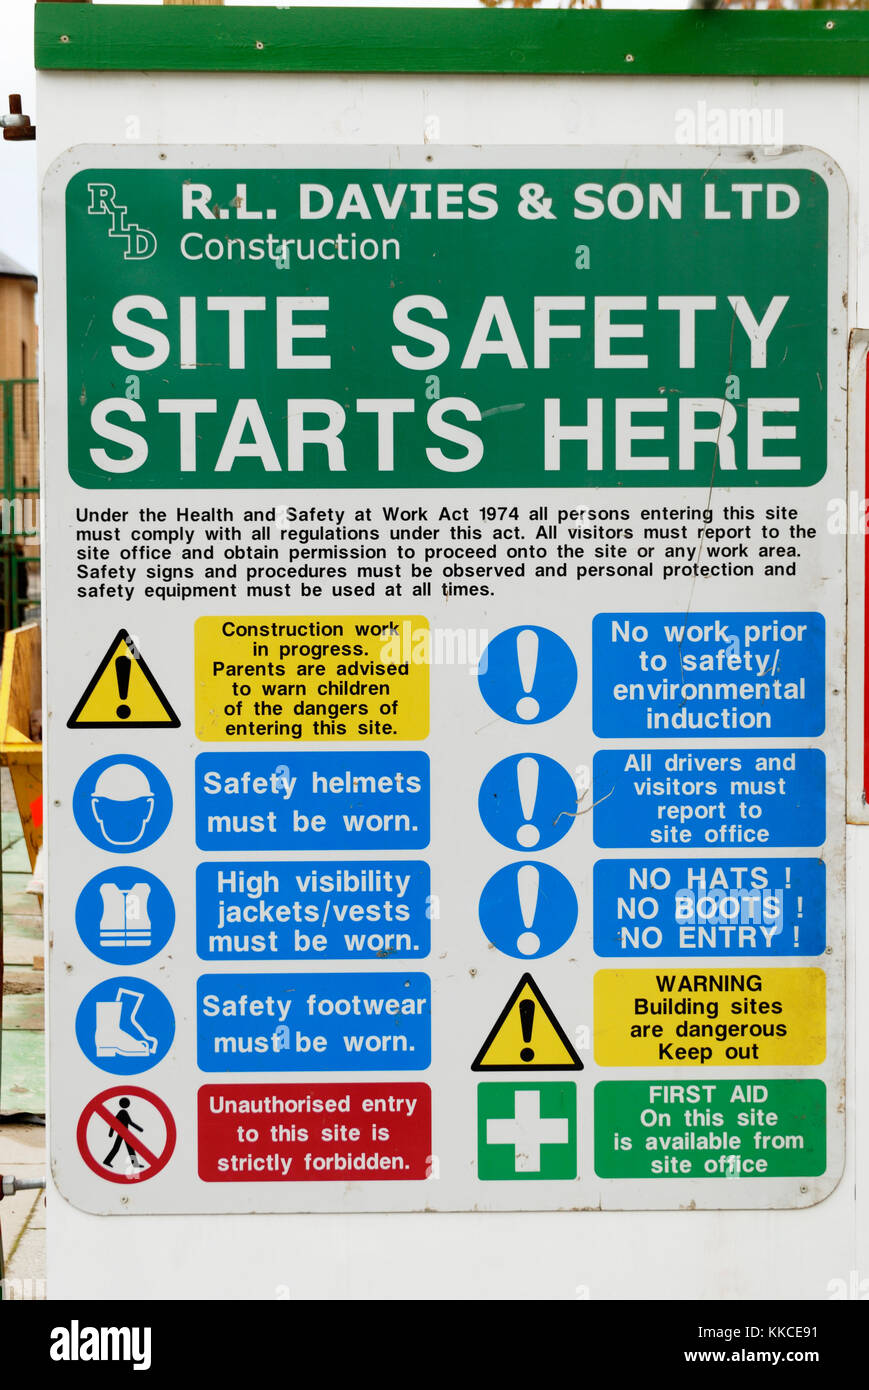 Site Safety signs at the entrance to a construction site, Wales. Stock Photo